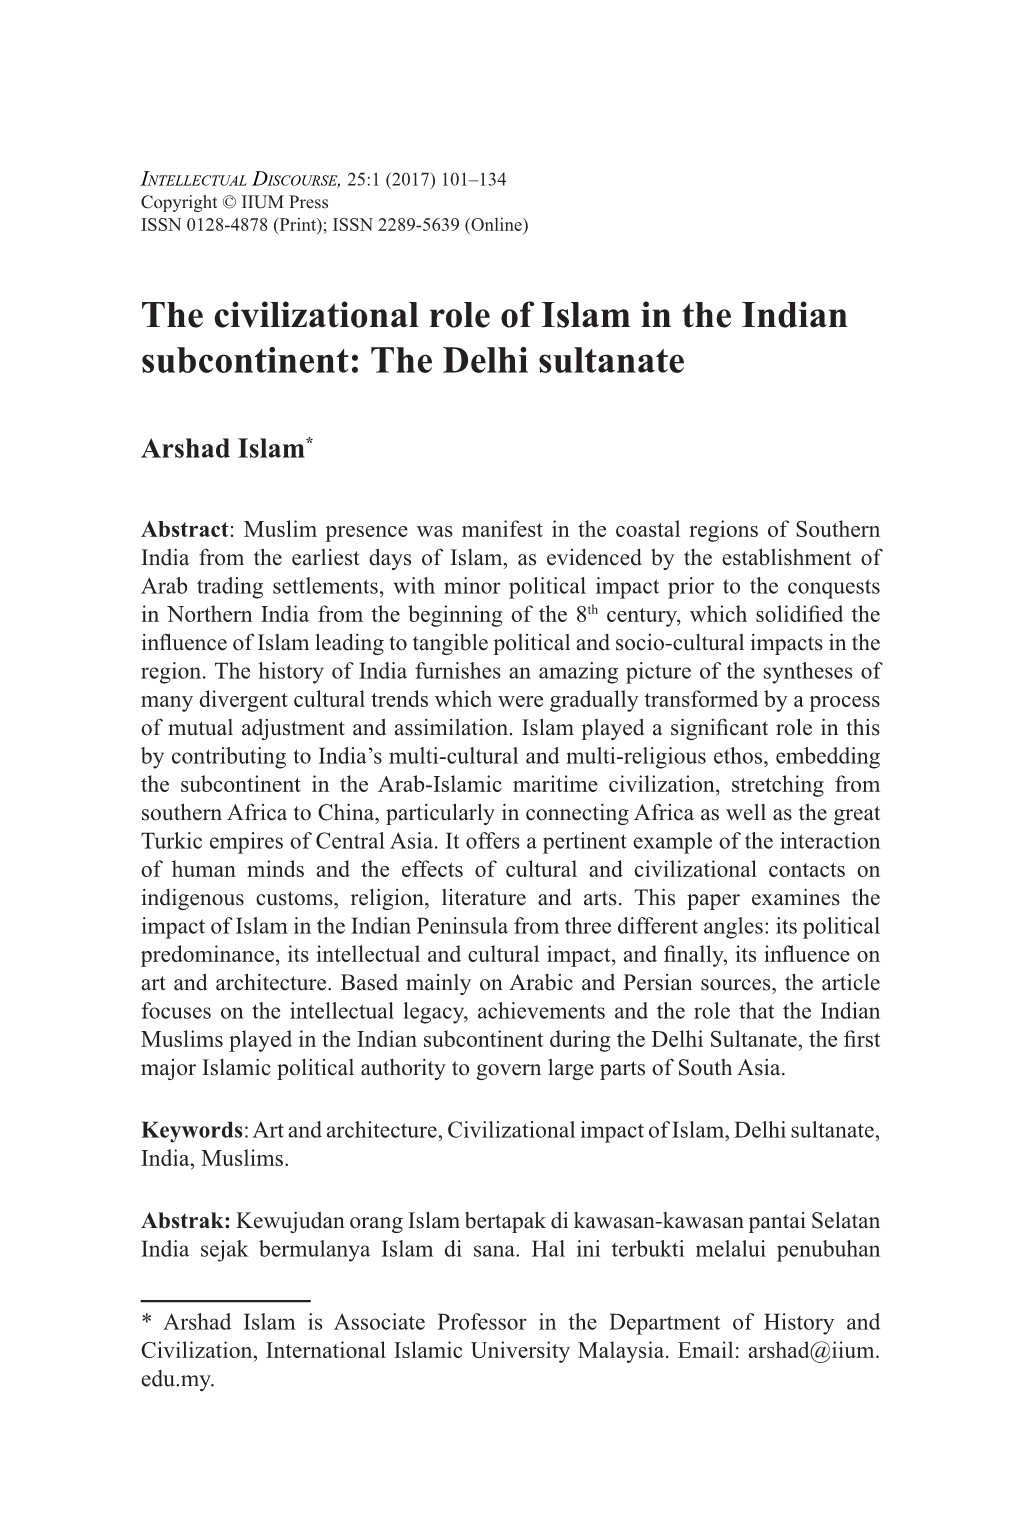 The Civilizational Role of Islam in the Indian Subcontinent: the Delhi Sultanate